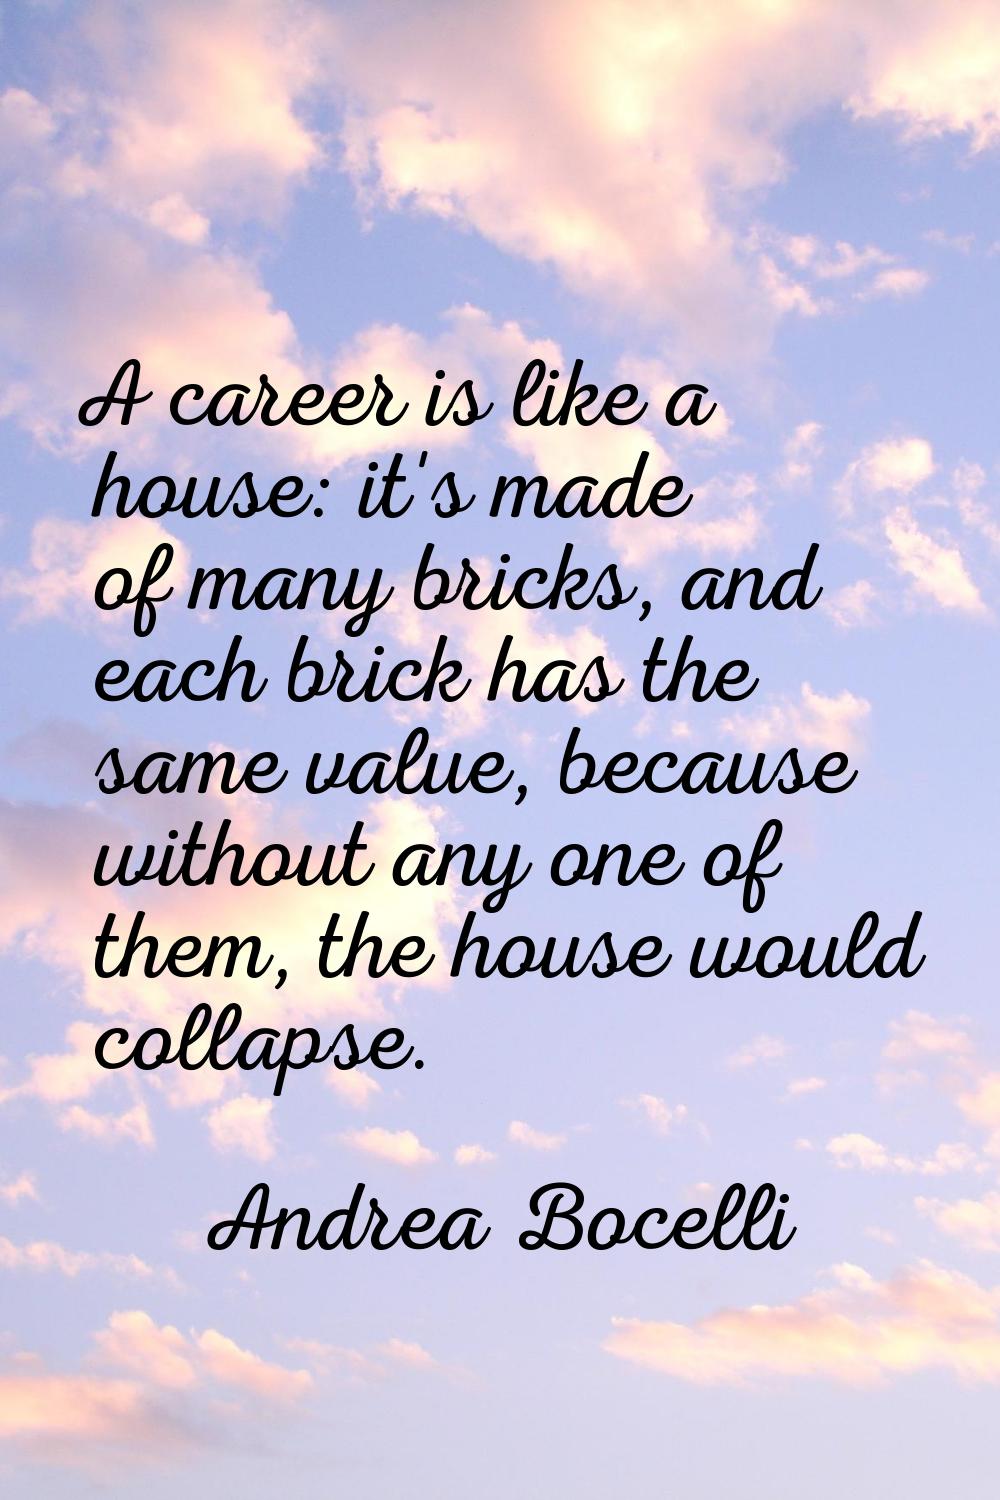 A career is like a house: it's made of many bricks, and each brick has the same value, because with